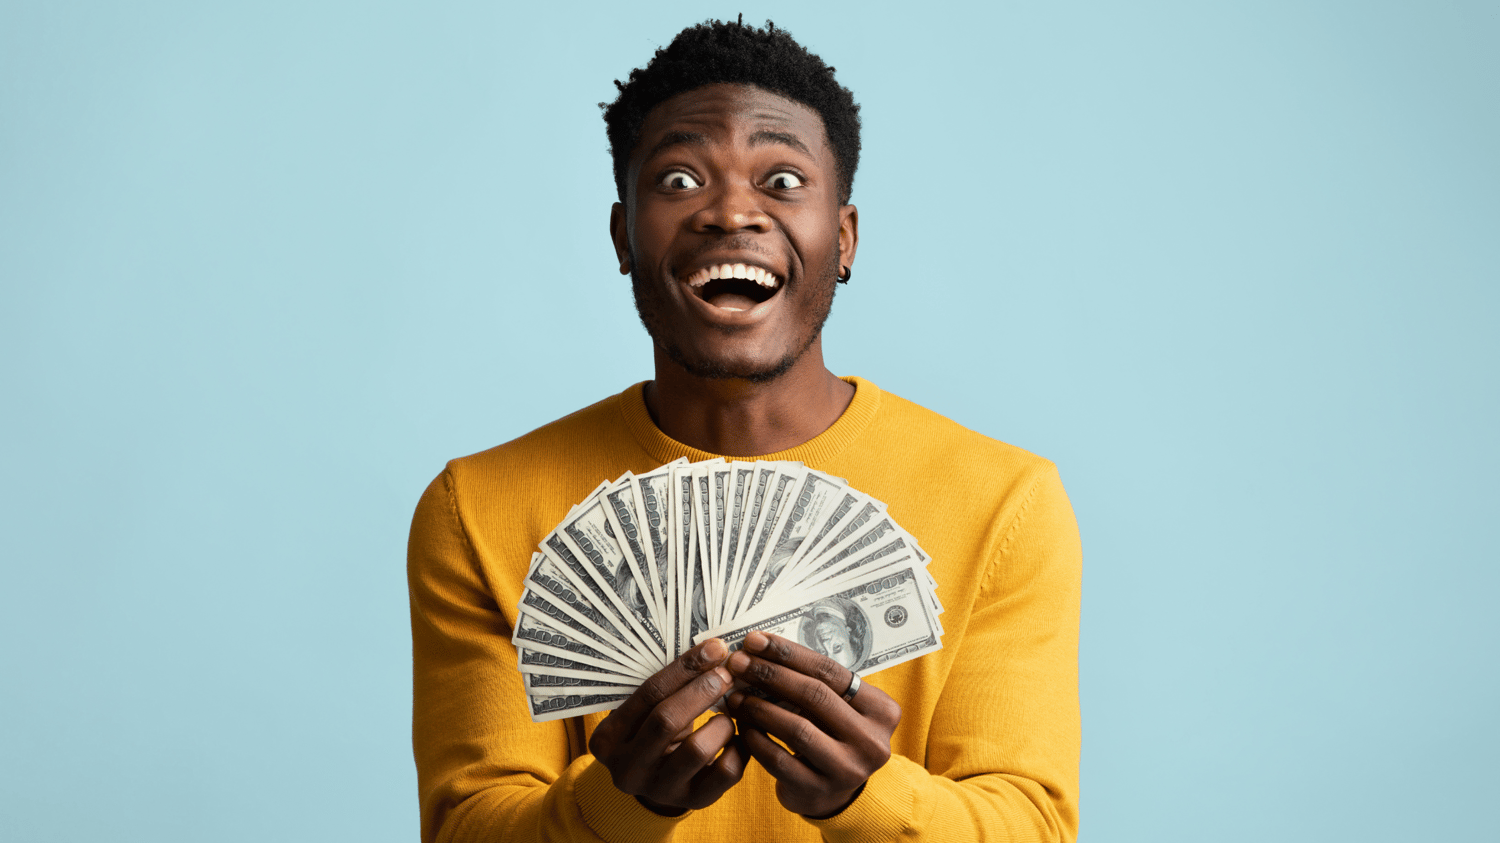 8 THINGS YOU SHOULD DO IF YOU WIN THE LOTTERY